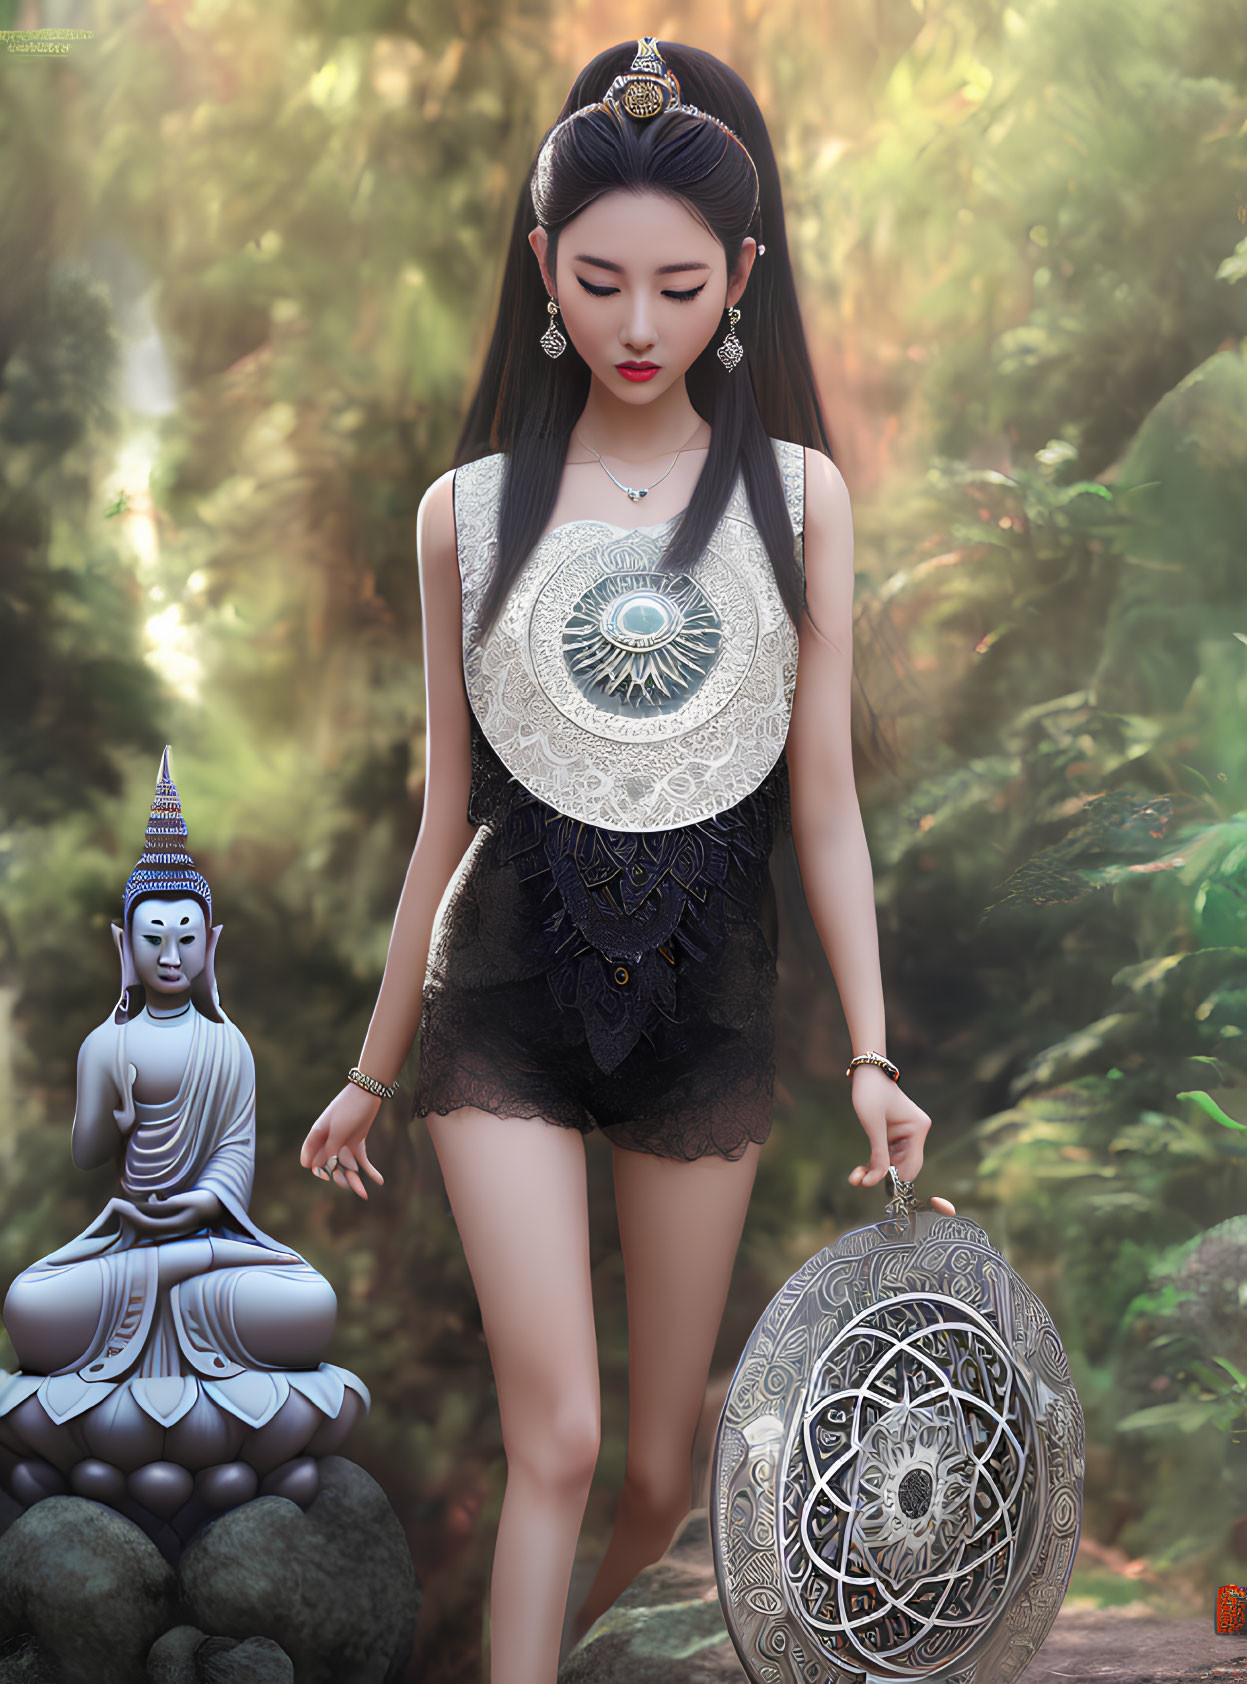 Detailed Illustration of Woman in Lace Top and Shorts with Shield and Buddha Statue